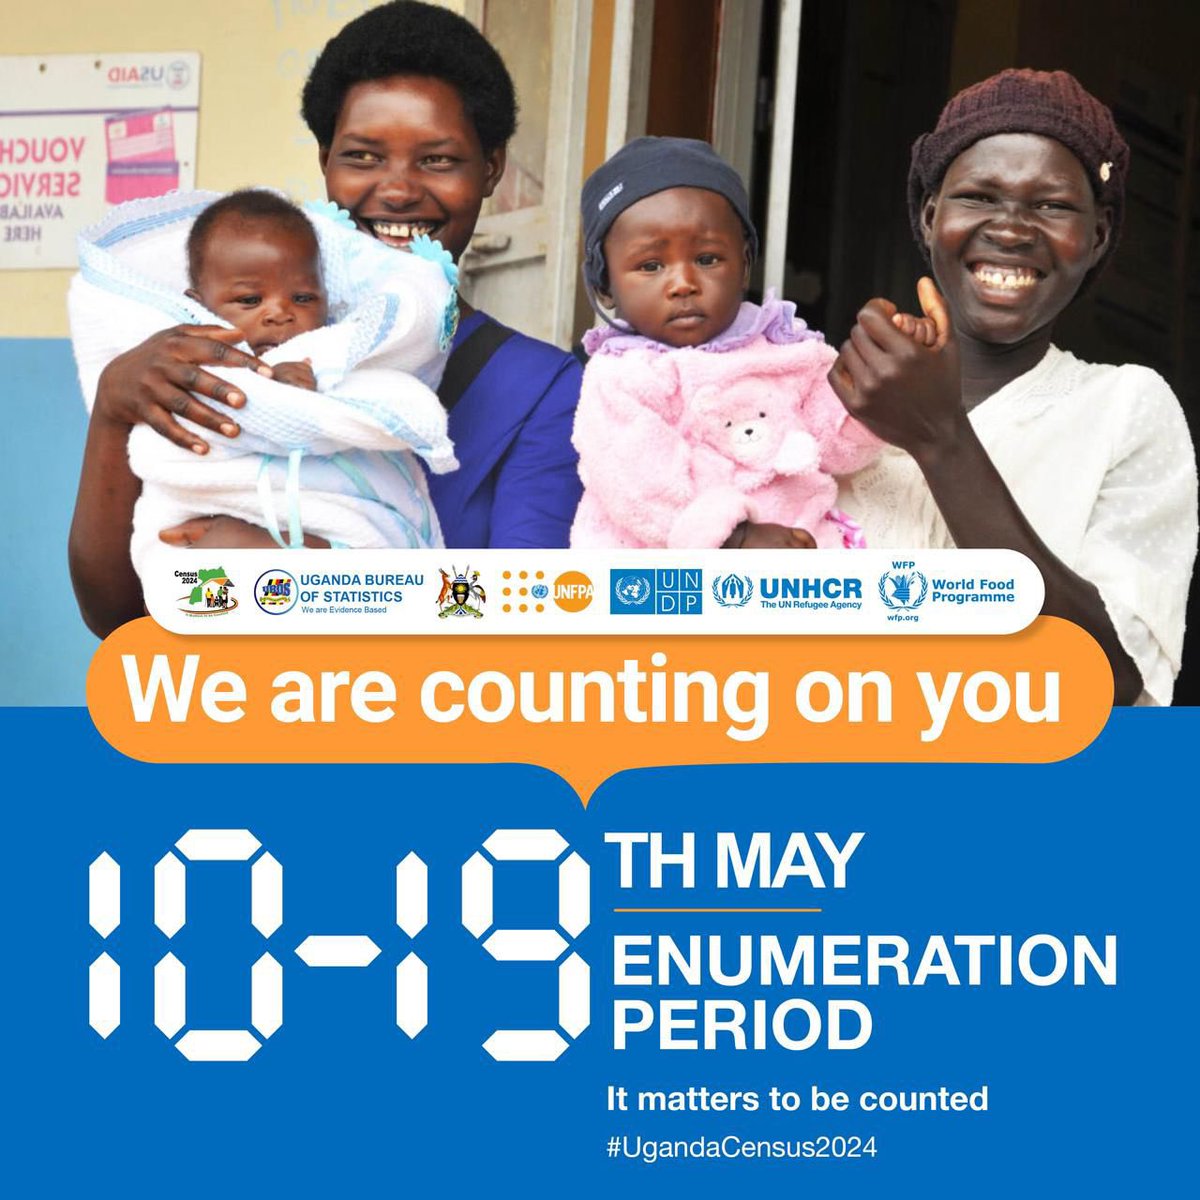 Good morning, Uganda! 🇺🇬 Today marks Day 1 of the National Housing and Population Census! Get ready to welcome your enumerators—we're counting on you to ensure every individual is accounted.🎉 #UgandaCensus2024